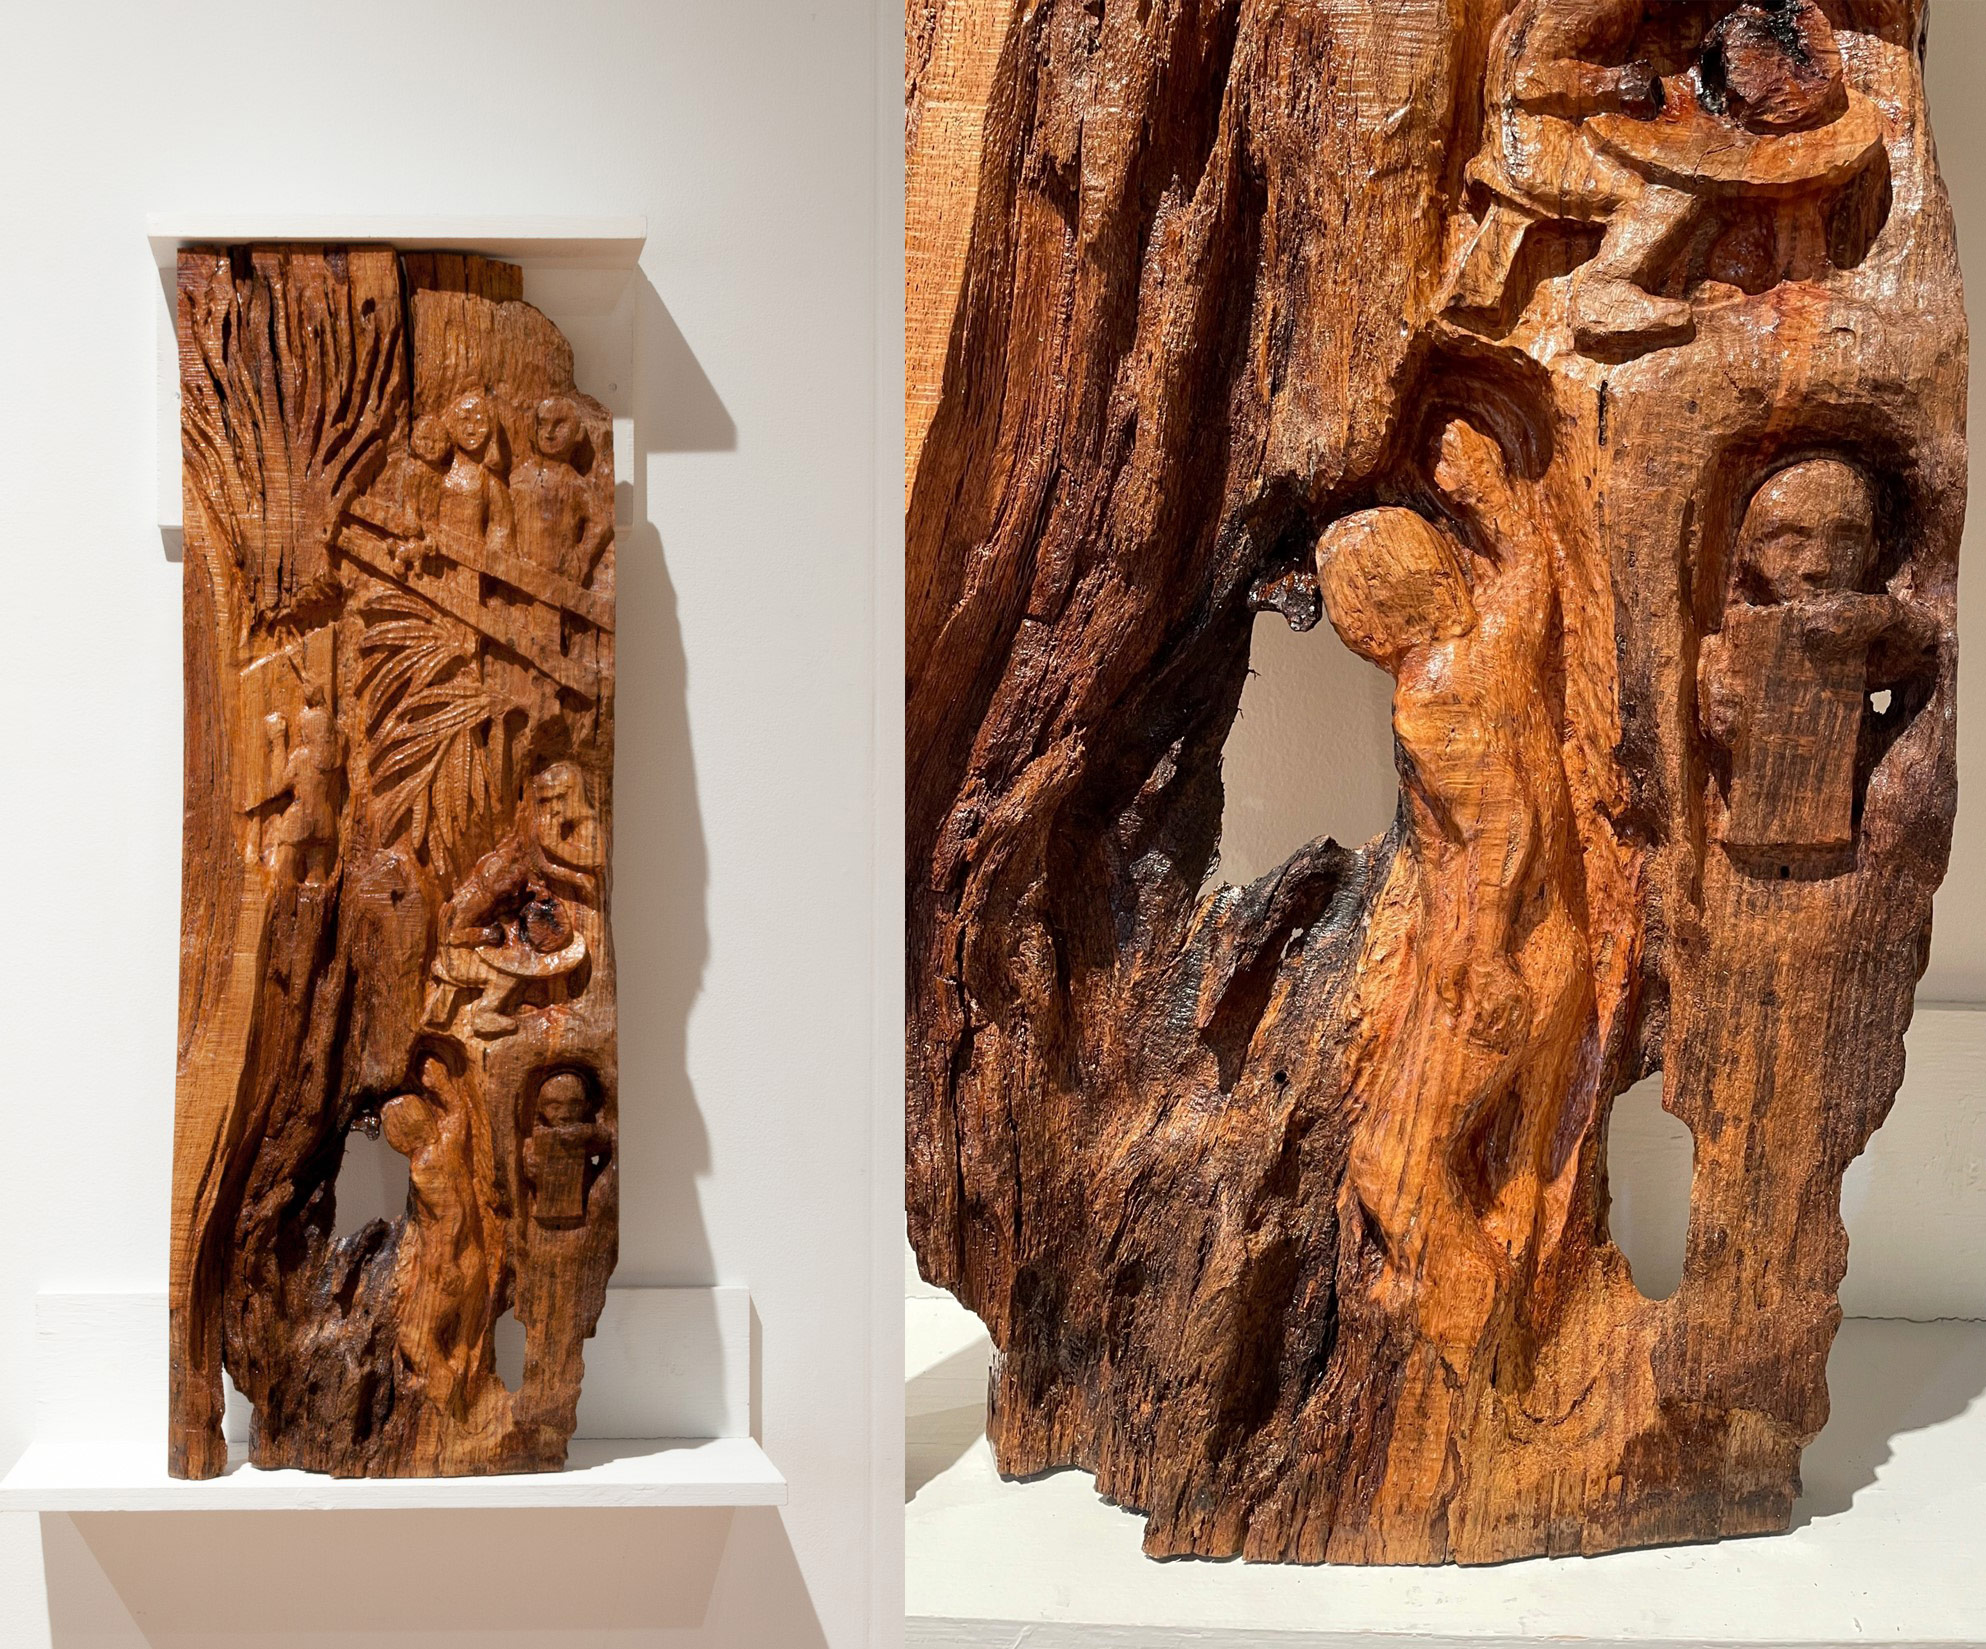 A wood relief carving of multiple human forms in the wood of the Willow Oak, by Tom Wenzka